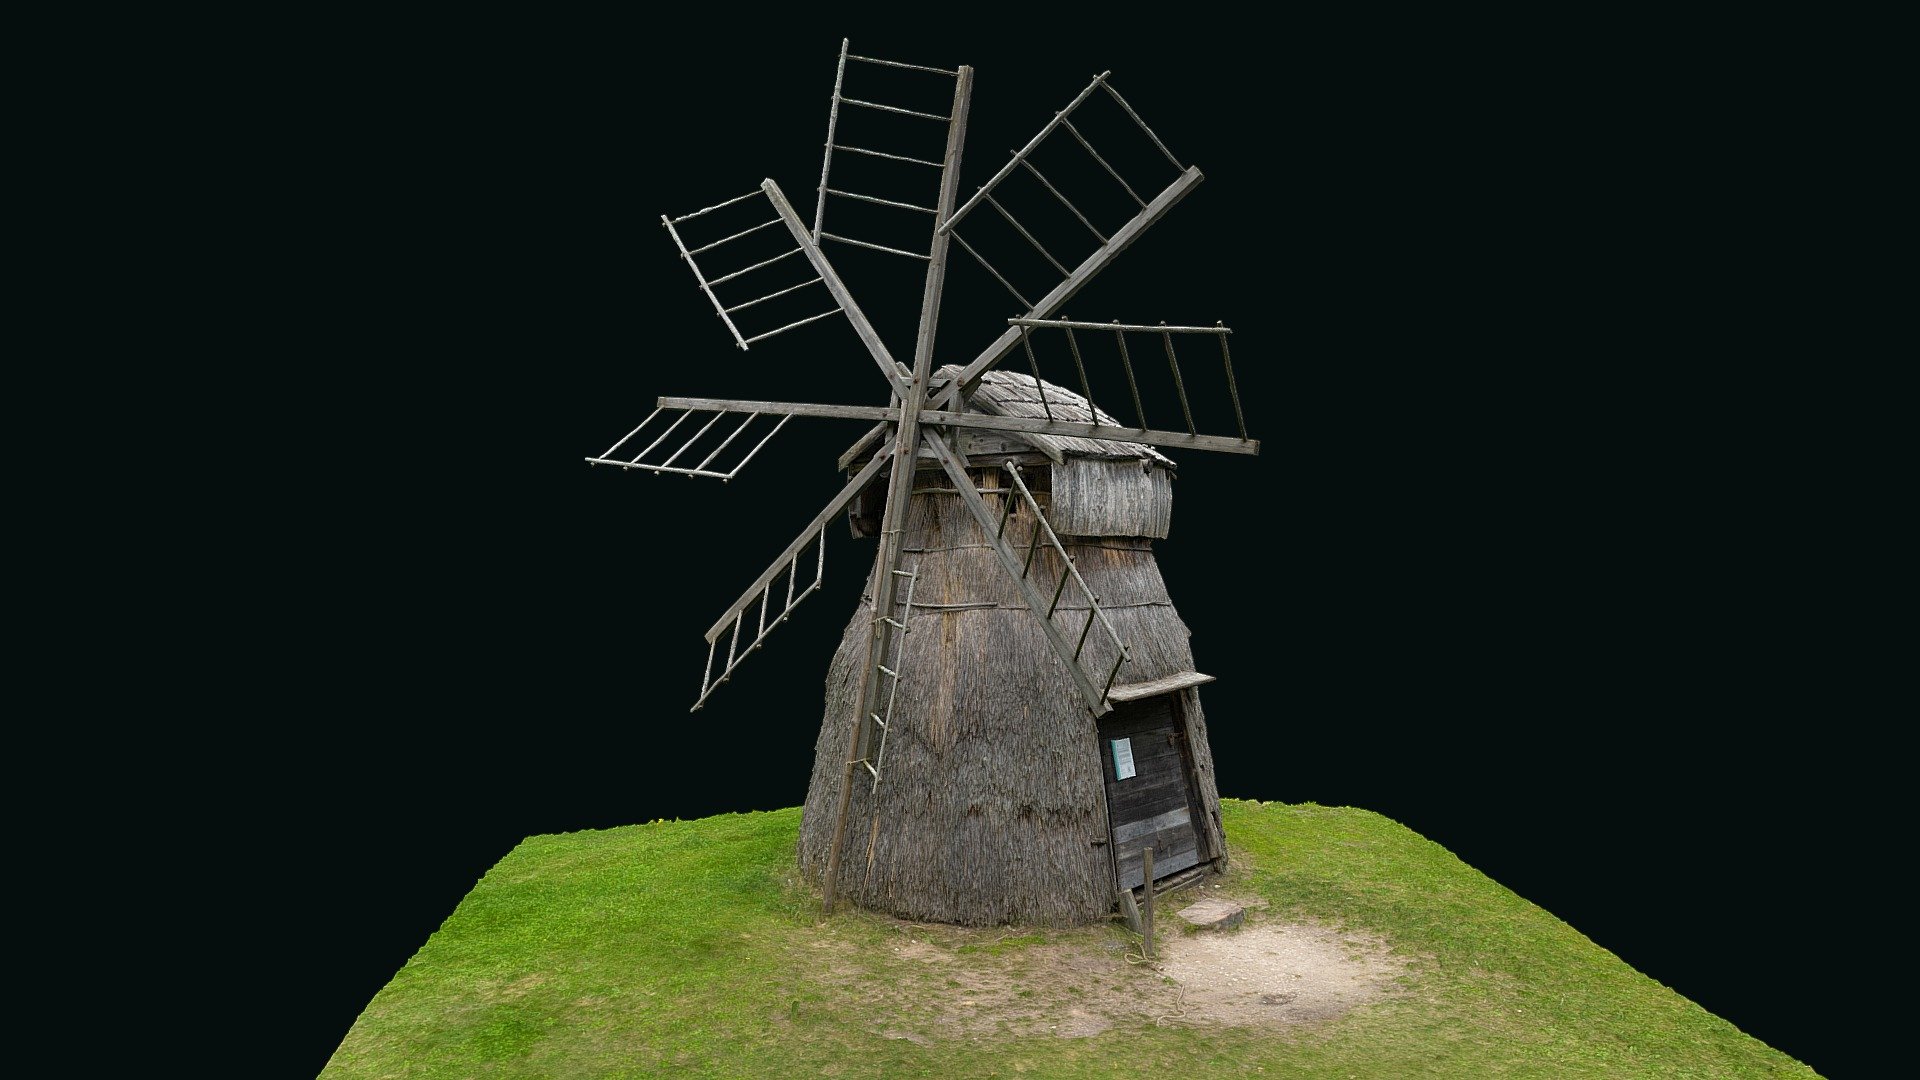 Sometime wide wings of windmills decorated and dominated the landscape. Standing away from the settlements, they looked lonely but powerful, welcoming the wind with all their might.

Dervinieku windmill 
Lat: 56.987875
Long: 24.281020 
Latvia

Photogrammetry reconstruction in RealityCapture from 220 images. © Saulius Zaura www.dronepartner.lt 2023 - Dervinieku windmill - 3D model by Saulius.Zaura 3d model